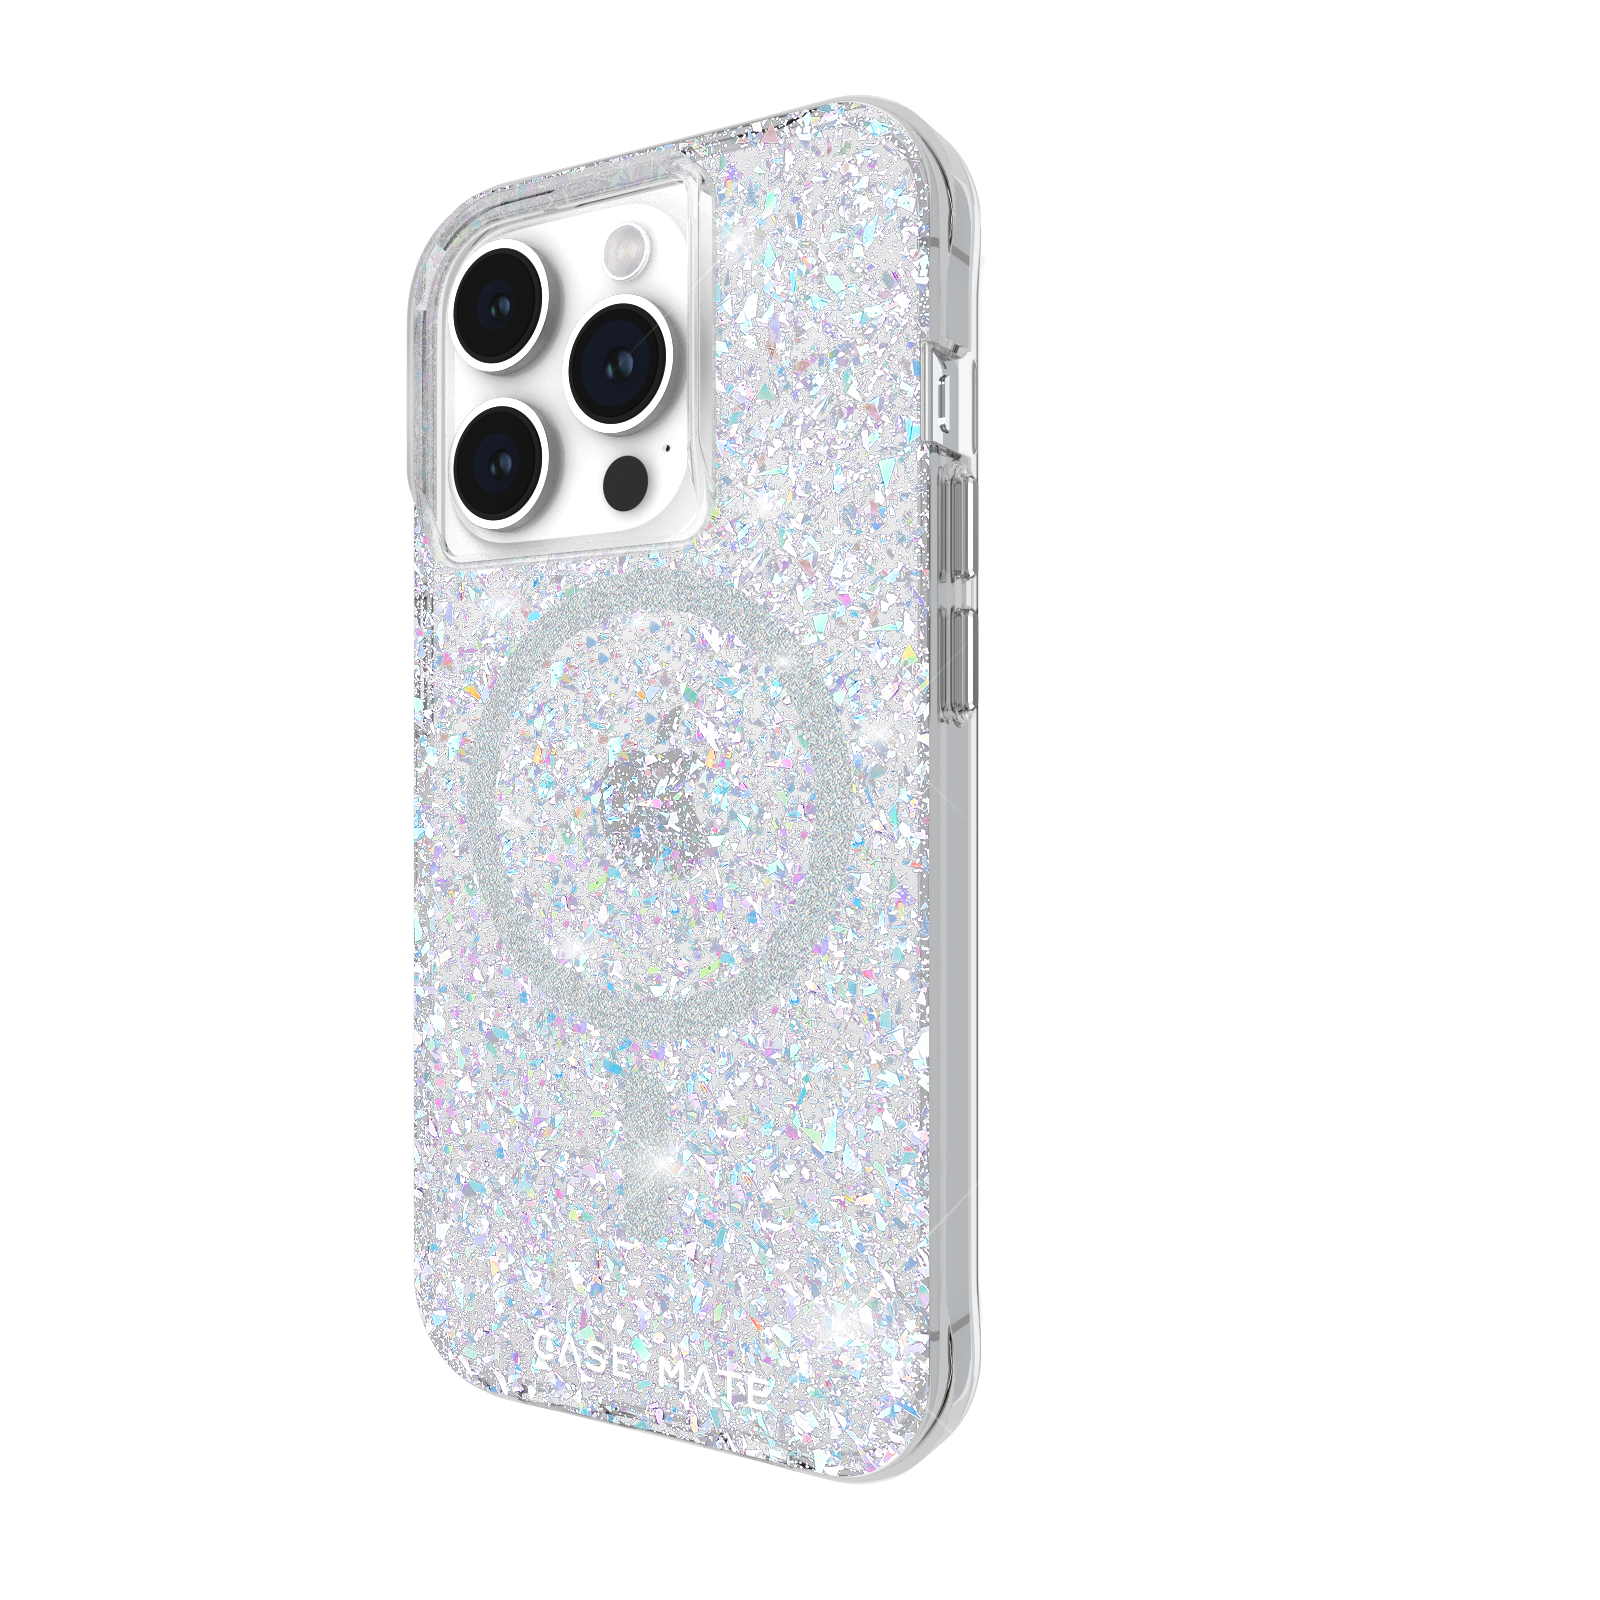 Glitzer Apple, 15 Pro, CASE-MATE Twinkle, Backcover, iPhone